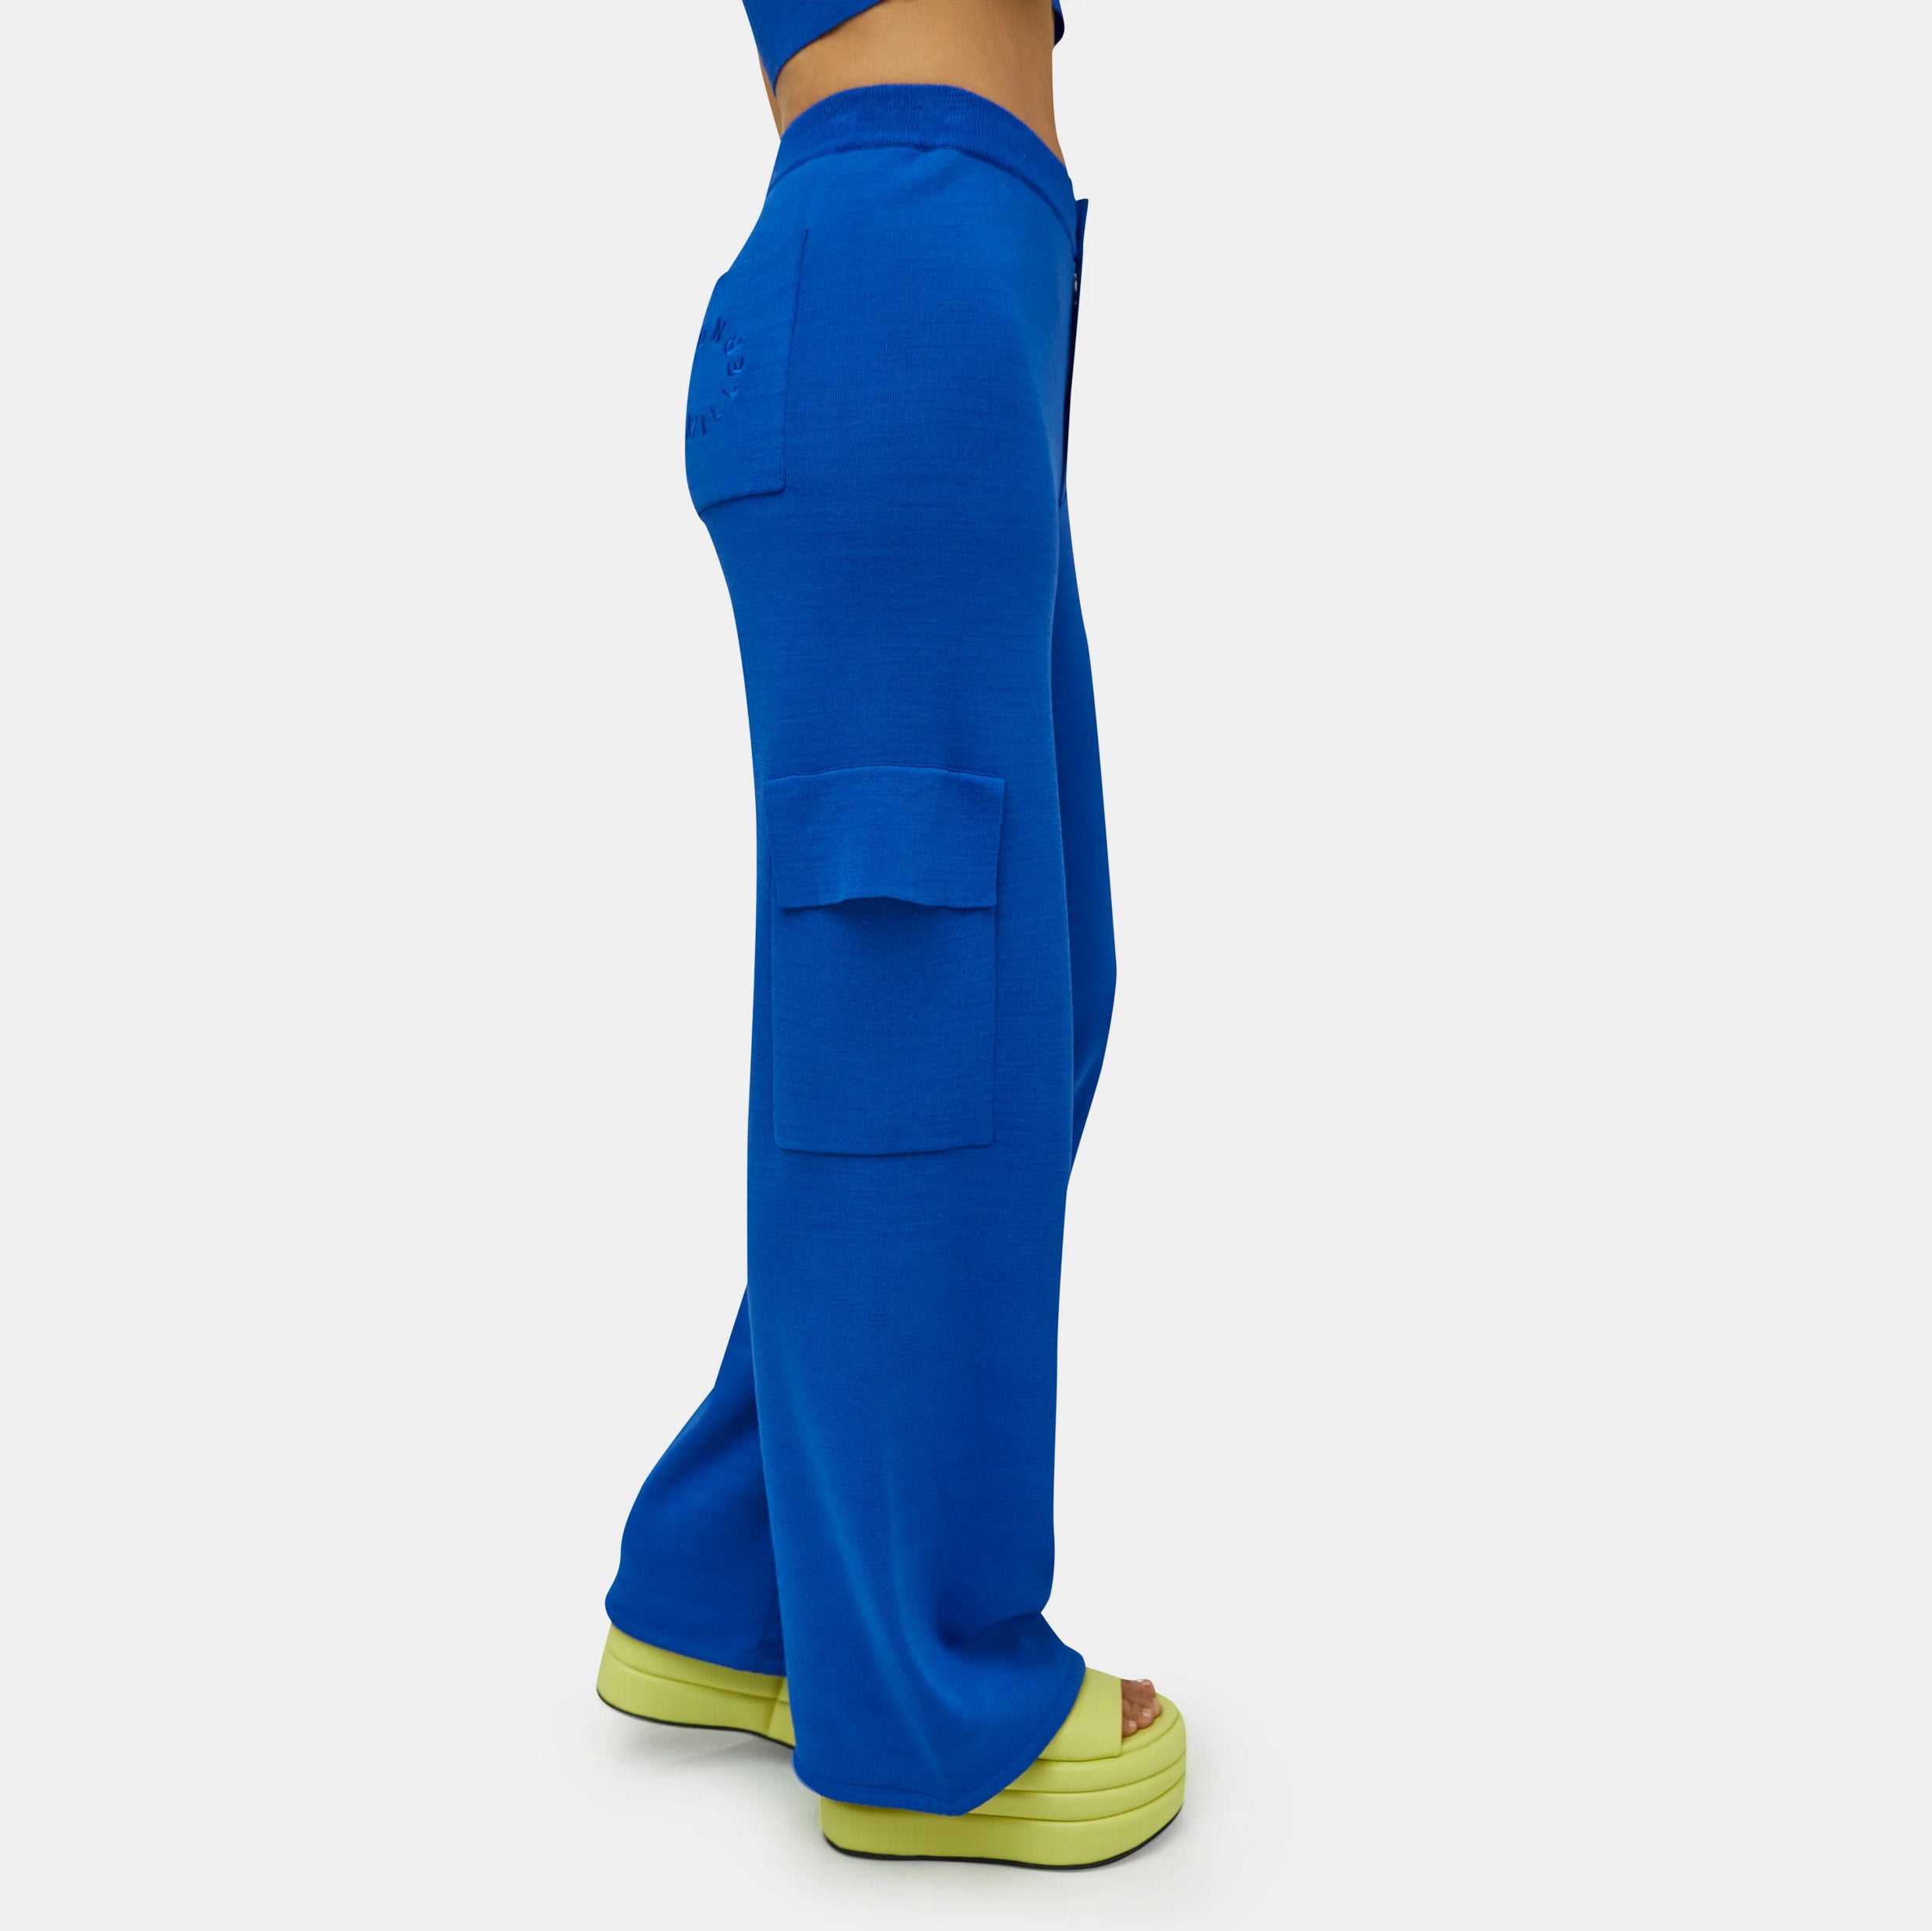 Close detail half body photo of the model wearing the Hesby Pant - a vibrant blue knit wide leg pant with side cargo-style pockets and a button & zip closure - side view.